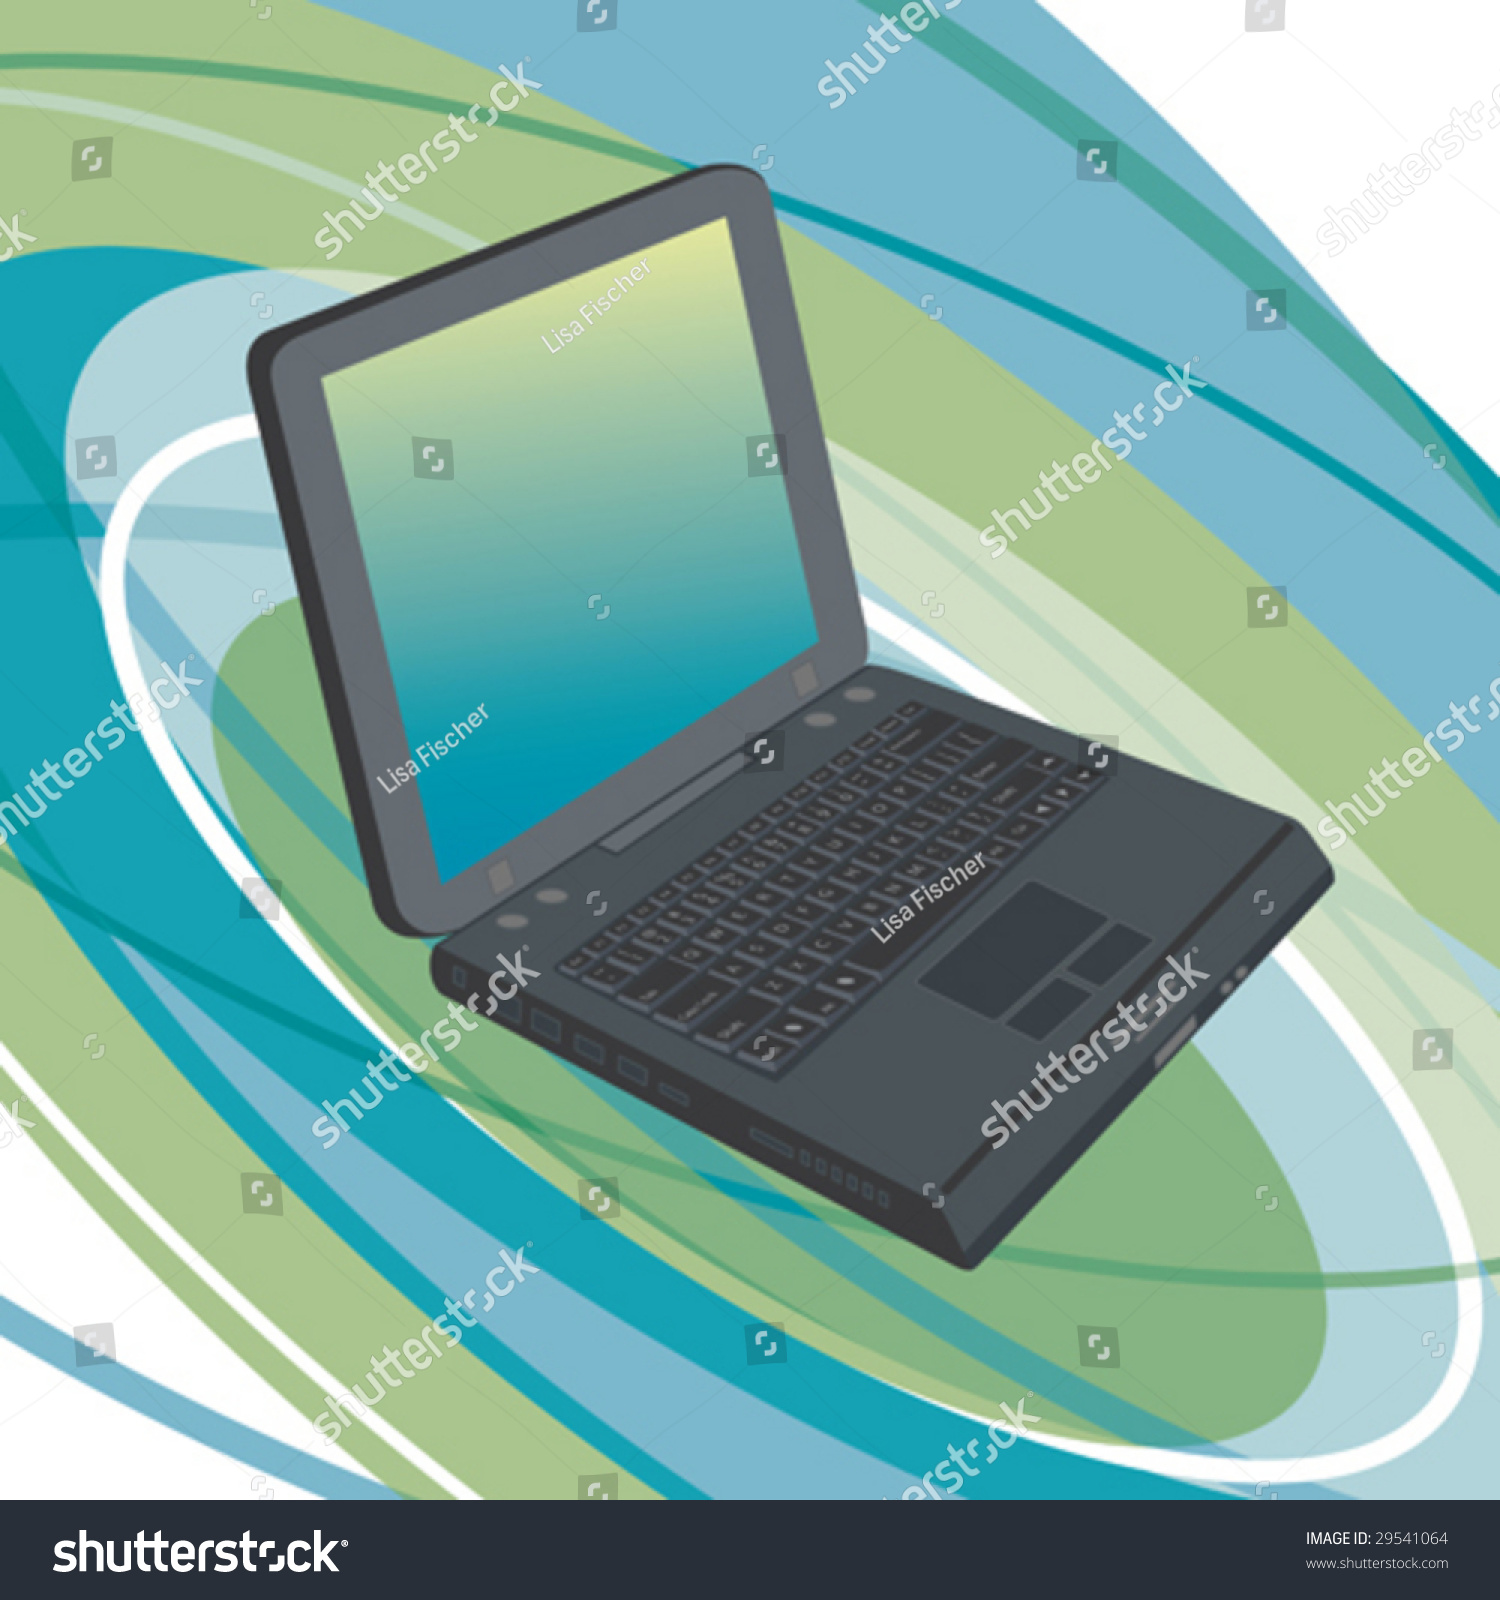 A Generic Laptop Computer On An Abstract Oval Background. Stock Vector ...